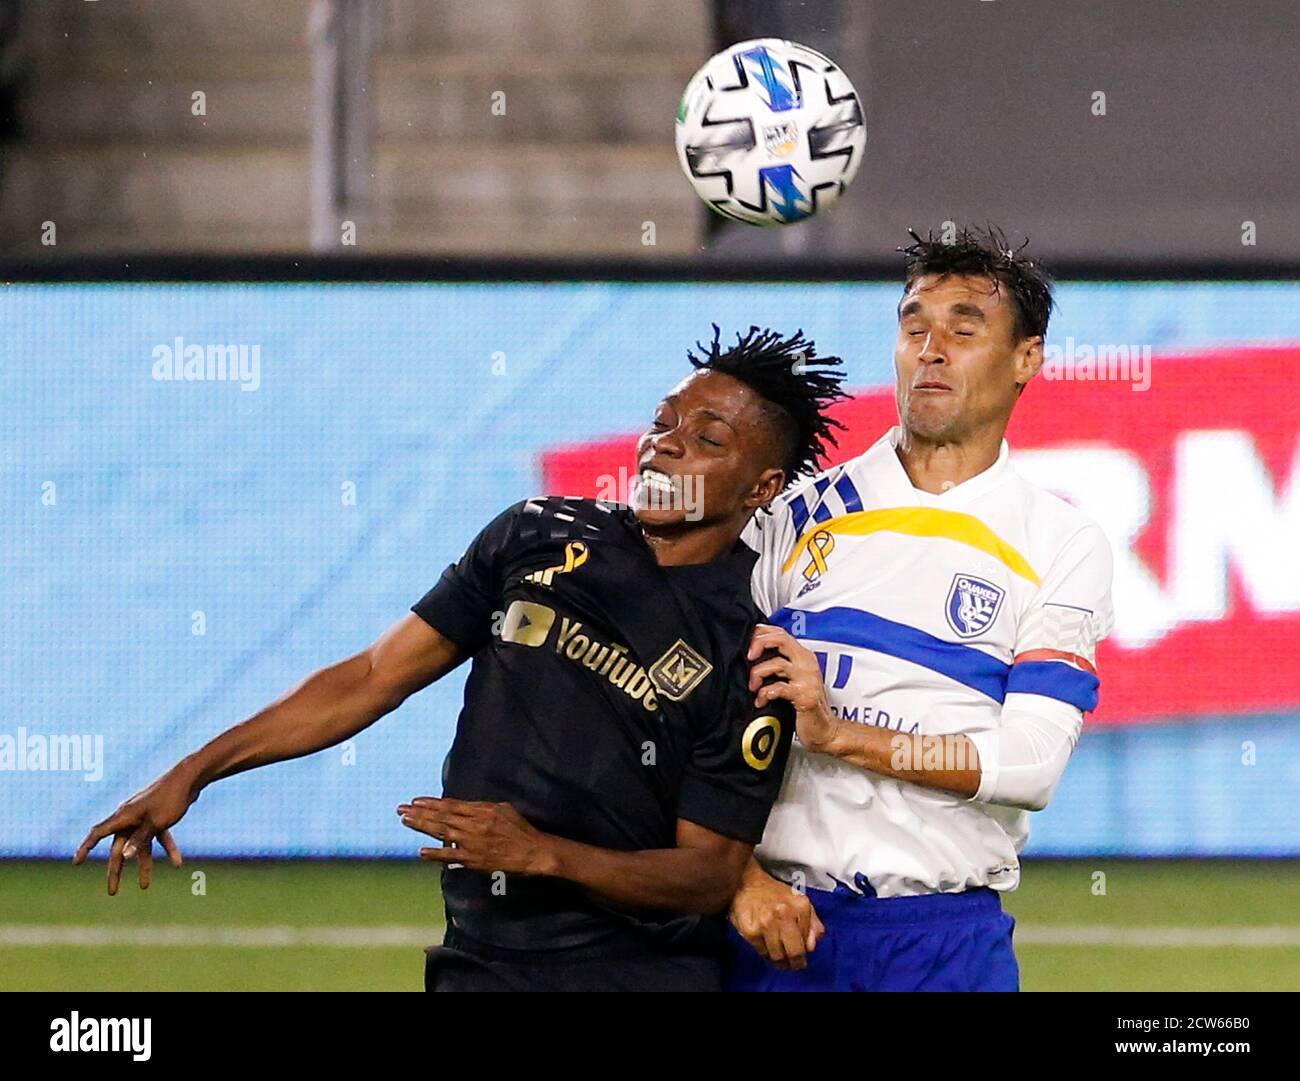 Los Angeles, California, USA. 27th Sep, 2020. Los Angeles FC forward Latif Blessing (7) of Ghana, and San Jose Earthquakes forward Chris Wondolowski (8) fight for the ball during the second half of a Major League Soccer match in Los Angeles, Sunday, Sept. 27, 2020. The Earthquakes won 2-1. Credit: Ringo Chiu/ZUMA Wire/Alamy Live News Stock Photo